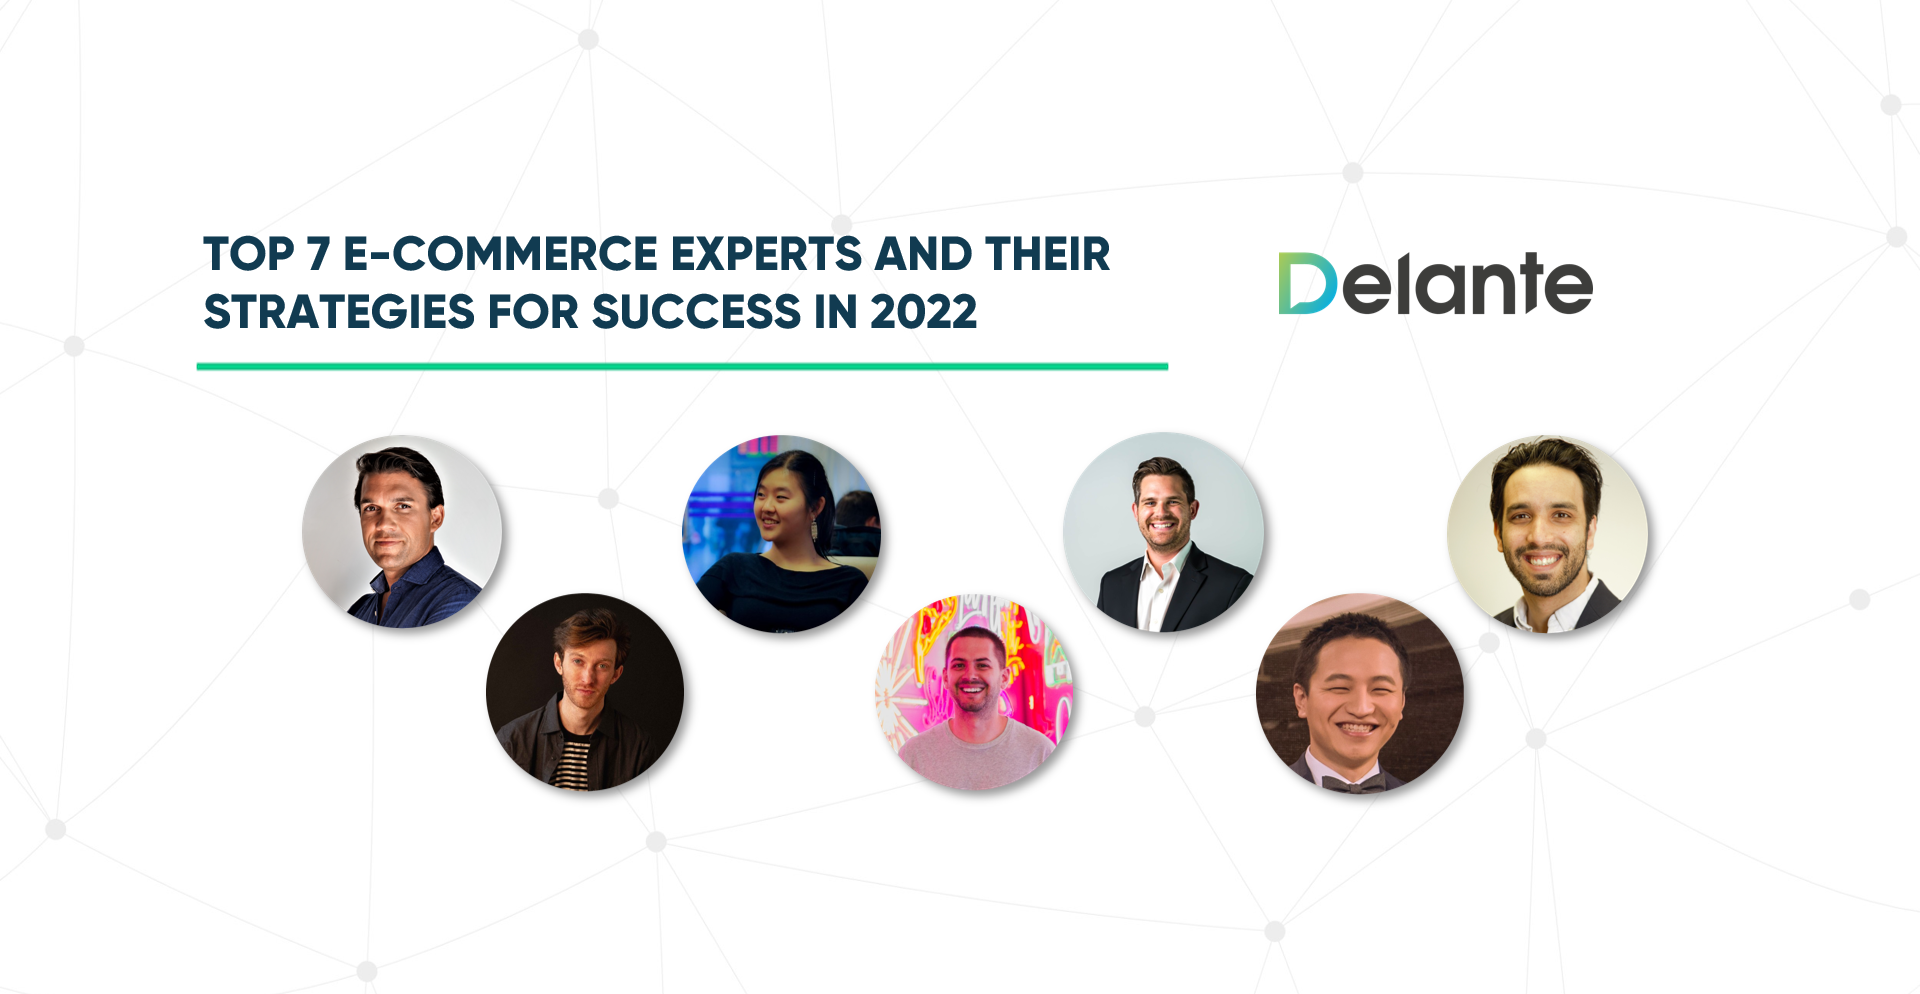 Top 7 E-commerce Experts and Their Strategies for Success in 2022